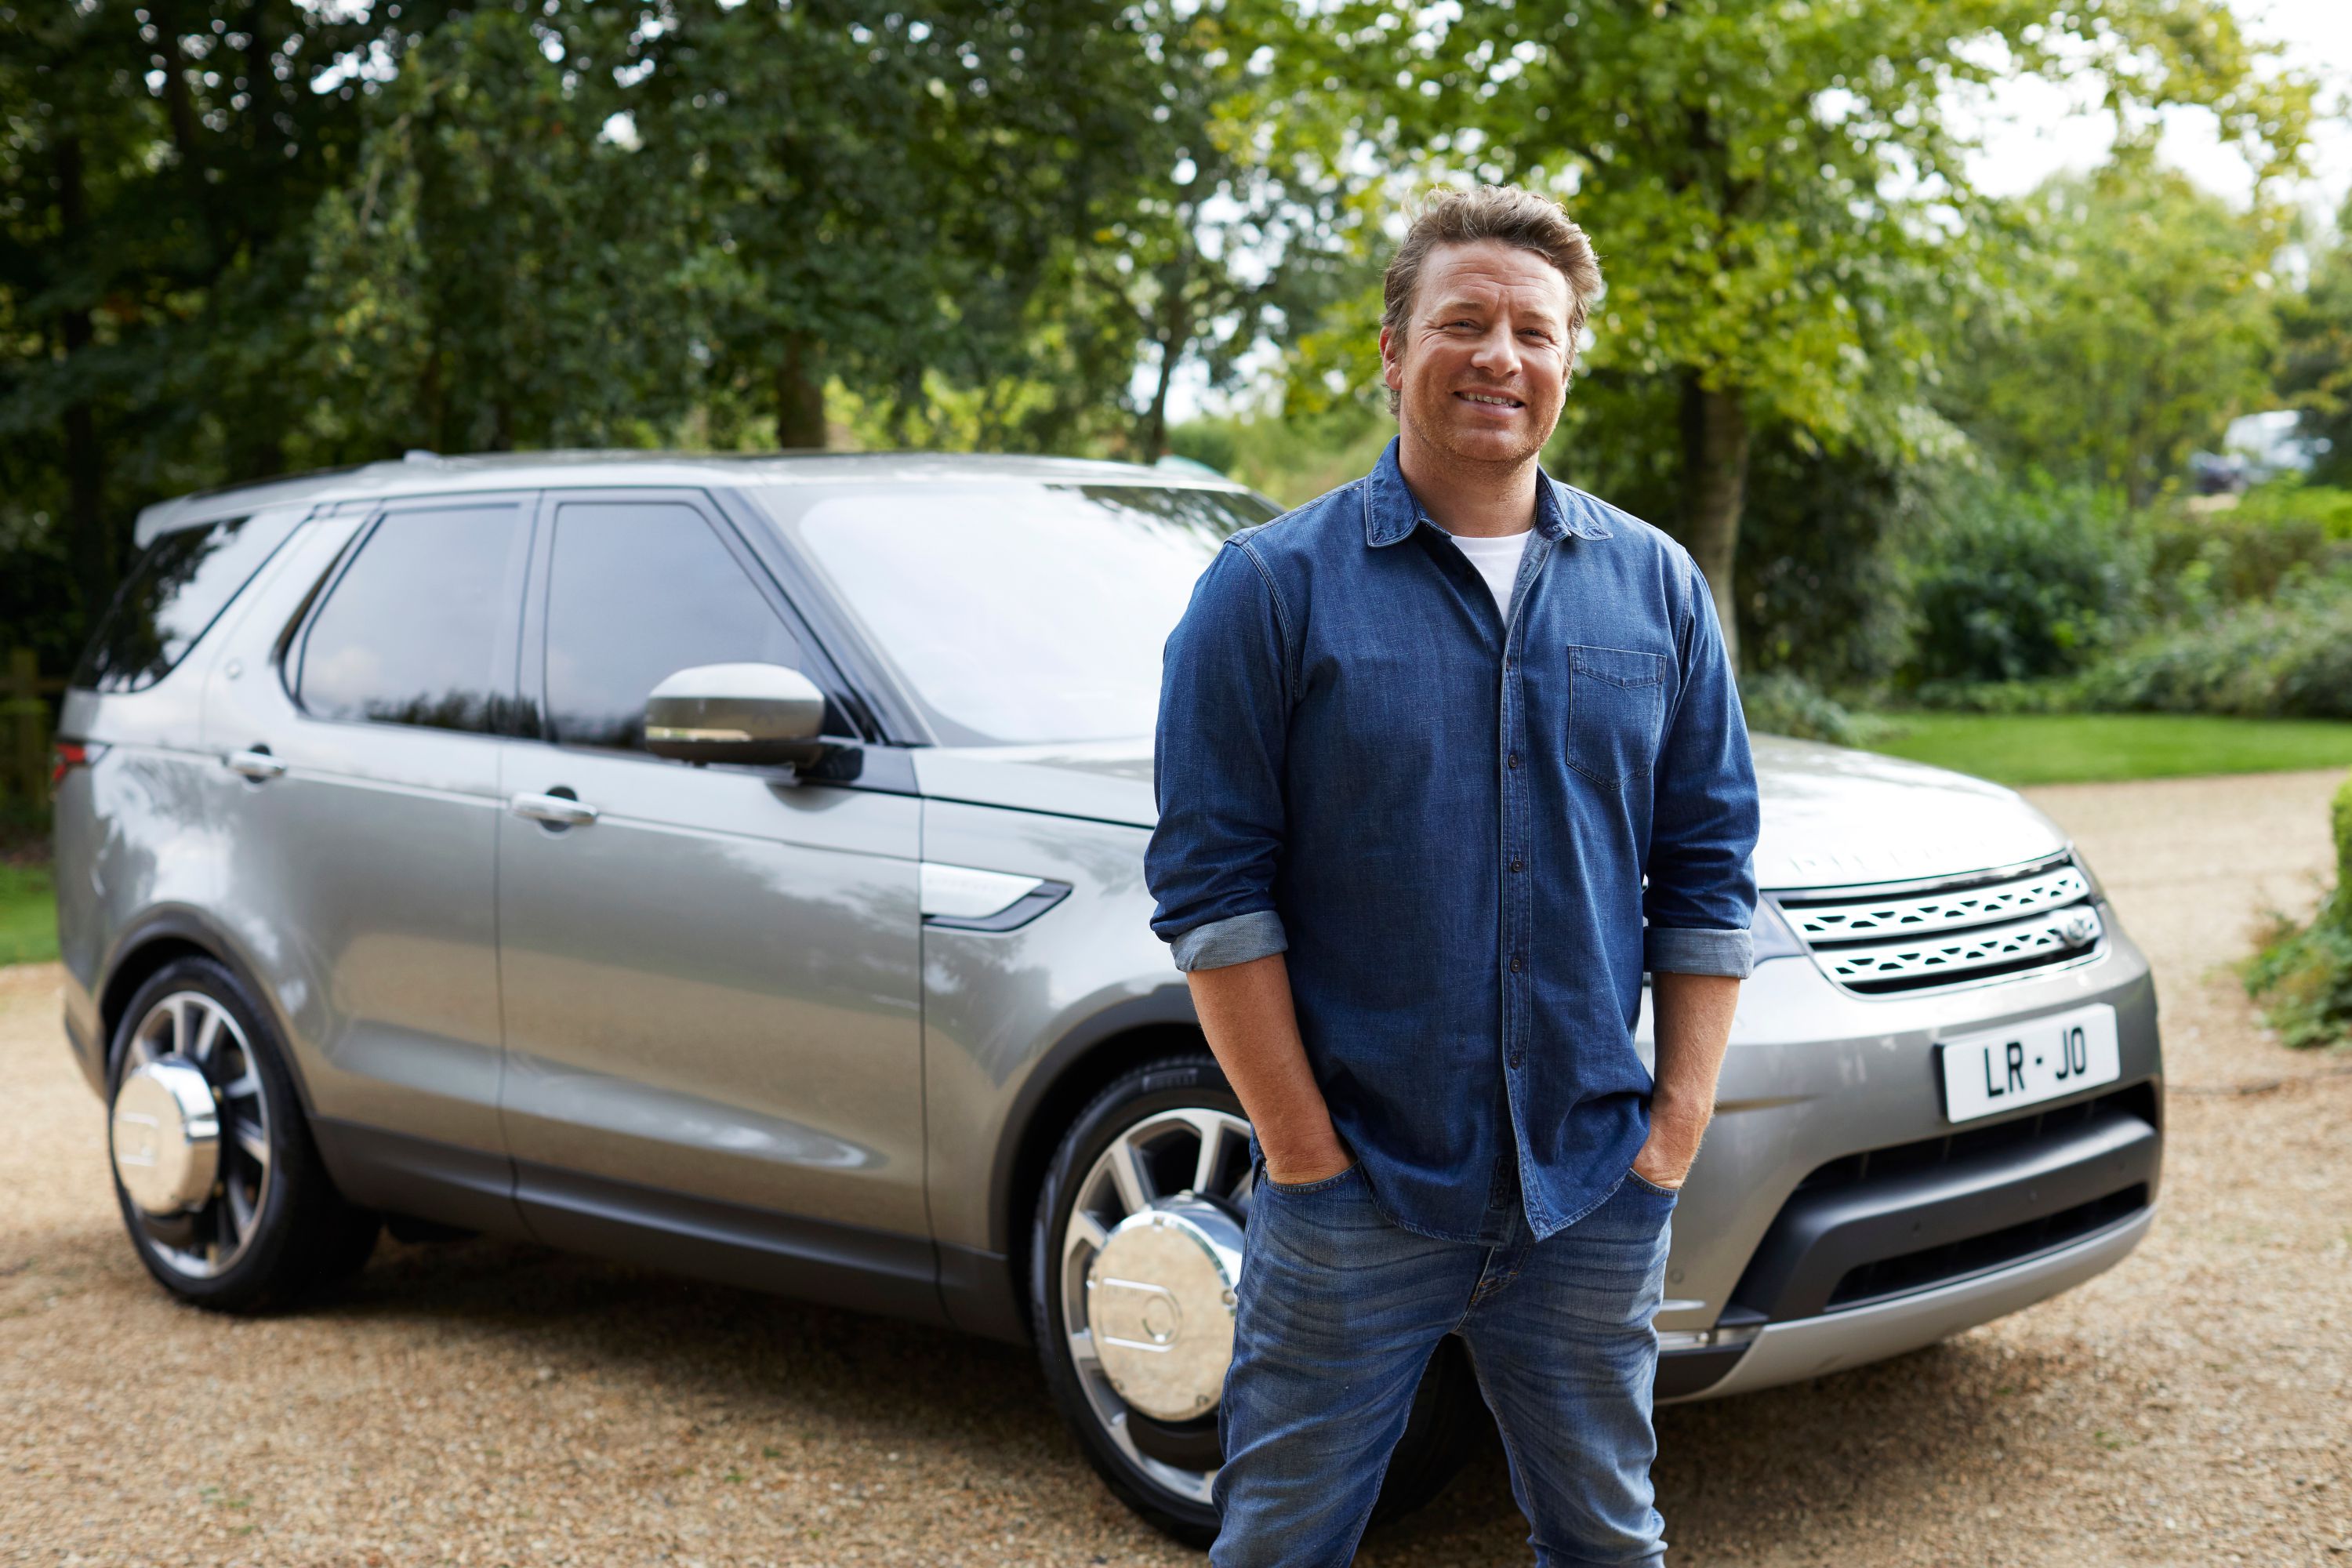 Jamie Oliver’s bespoke Land Rover is the ultimate kitchen on wheels